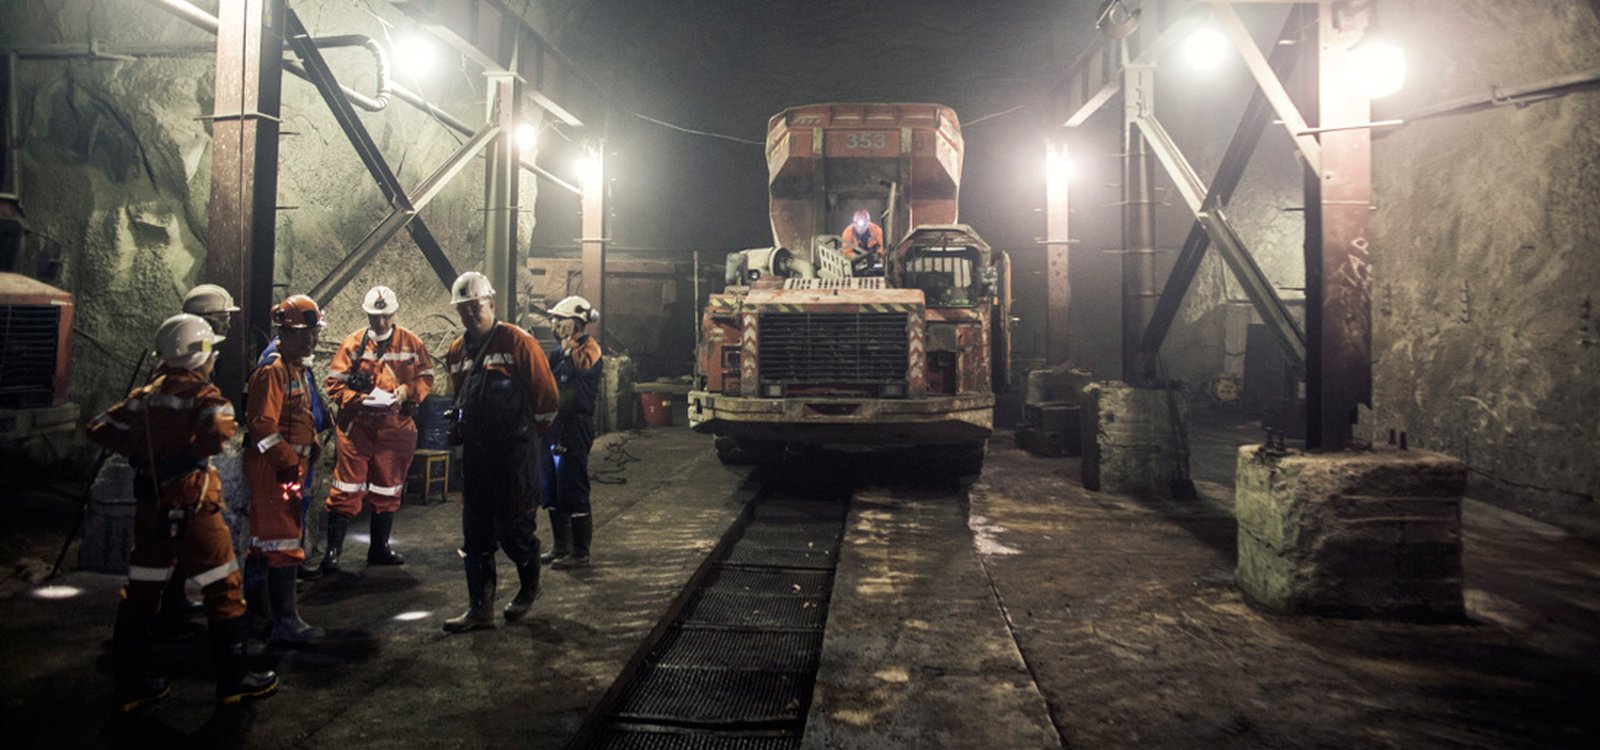 The cooperation between Kazakhmys and Sandvik began in the 1970s. 